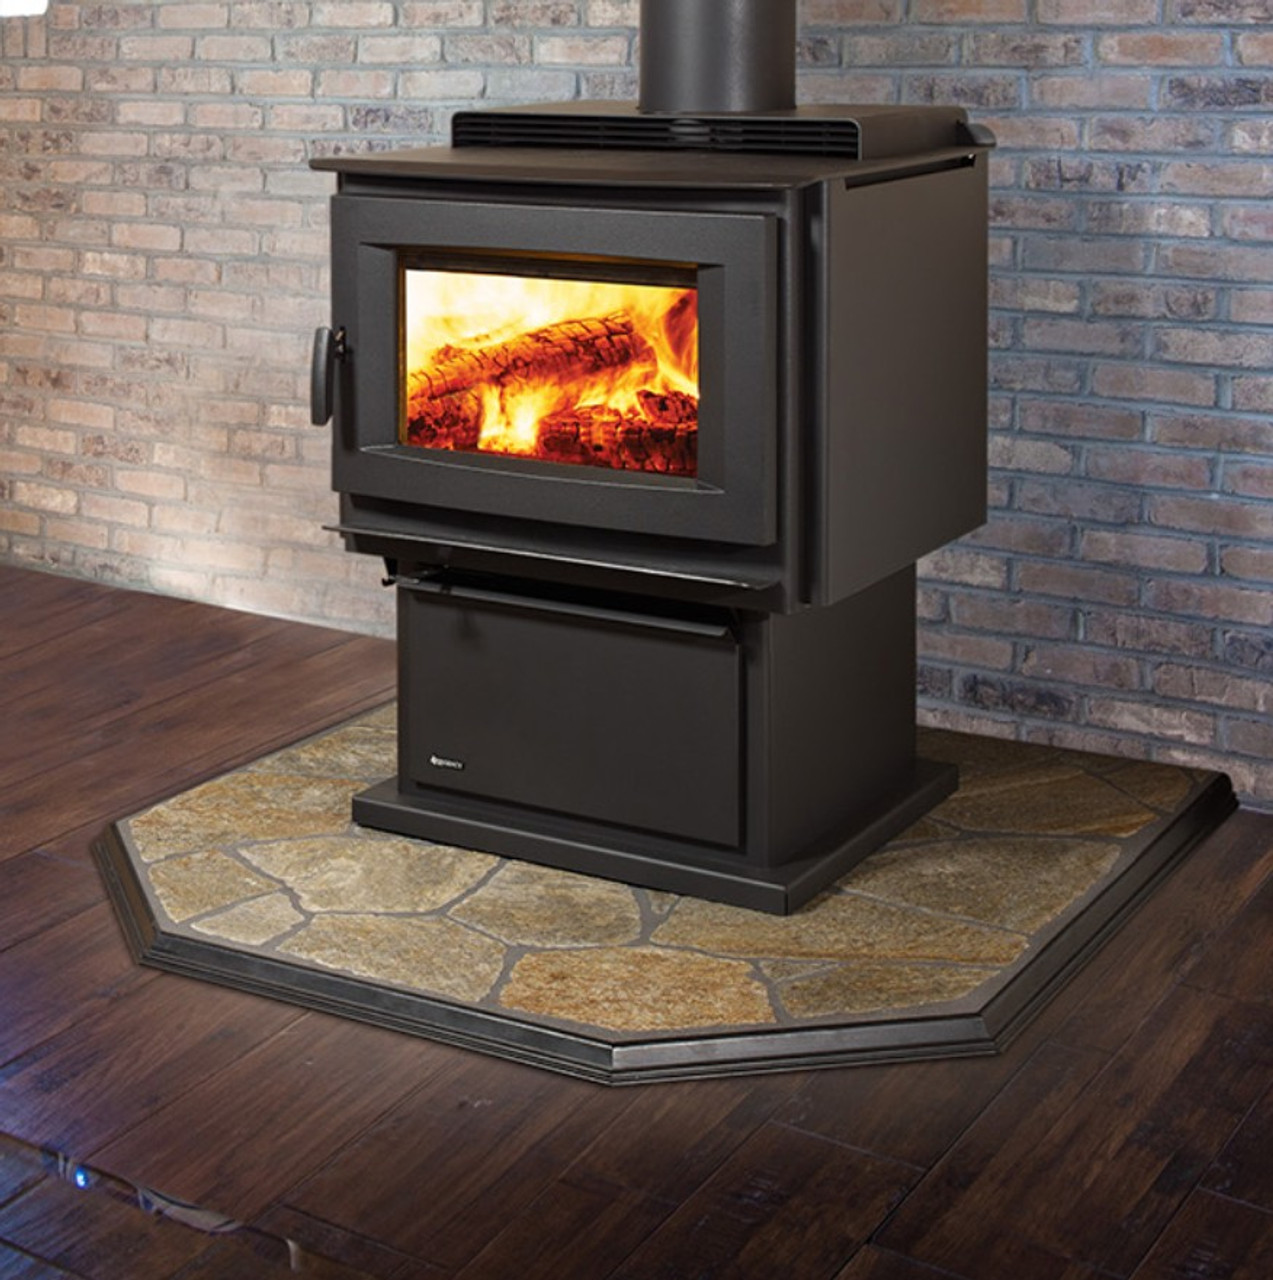 How to Install a Wood Burning Stove: A Step-by-Step Guide缩略图